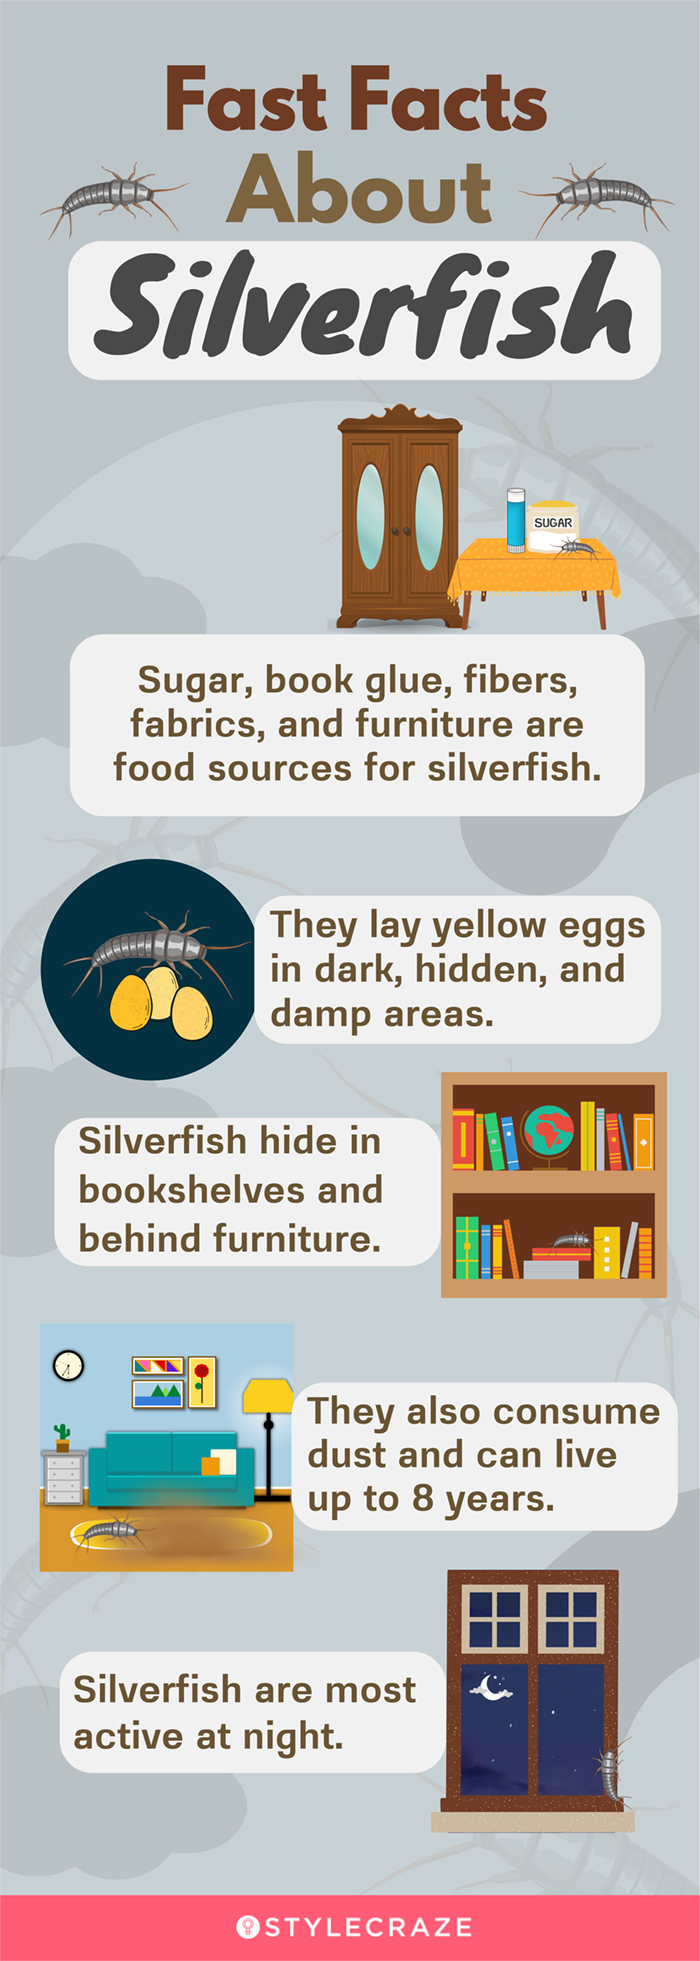 fast facts about silver fish (infographic)